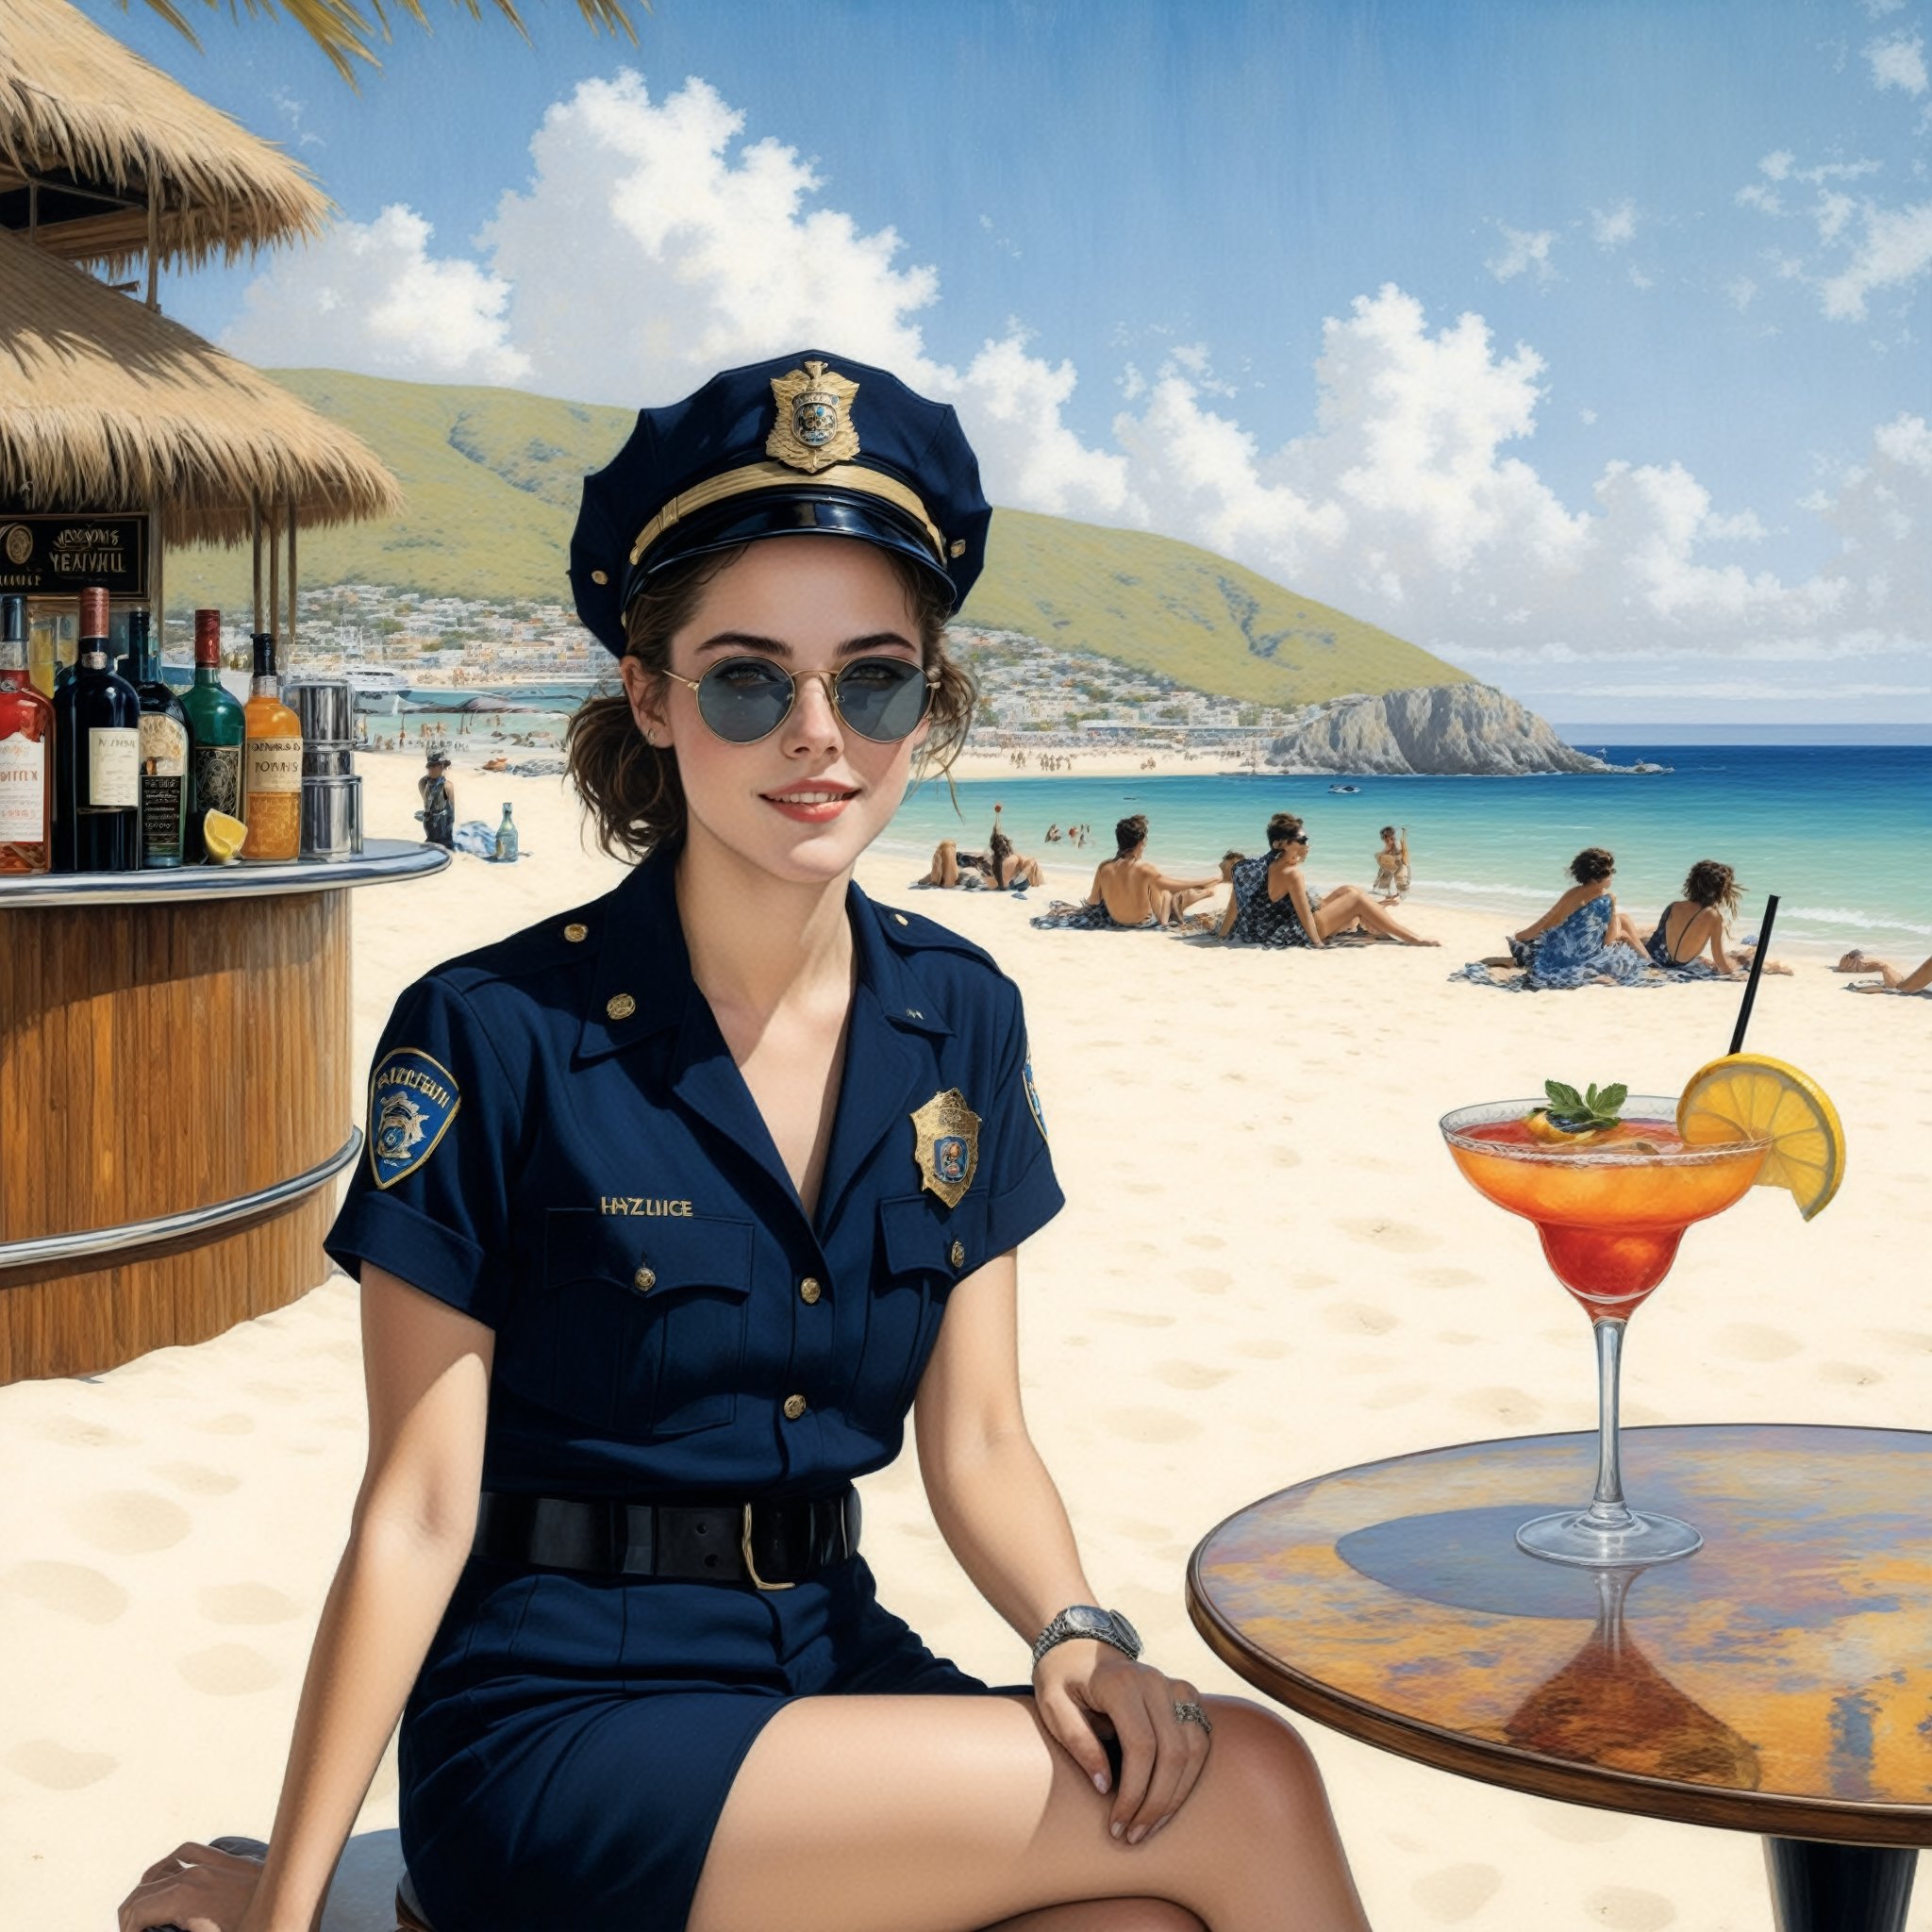 Hyper-Realistic photo of a beautiful LAPD police officer sitting in a cocktail bar on a beach,20yo,1girl,solo,LAPD police uniform,cap,detailed exquisite face,soft shiny skin,smile,looking at viewer,Kristen Stewart lookalike,cap,sunglasses,fullbody:1.3
BREAK
backdrop:cocktail bar,table,cocktail,beach,sky,boat,[cluttered maximalism]
BREAK
settings: (rule of thirds1.3),perfect composition,studio photo,trending on artstation,depth of perspective,(Masterpiece,Best quality,32k,UHD:1.4),(sharp focus,high contrast,HDR,hyper-detailed,intricate details,ultra-realistic,kodachrome 800:1.3),(cinematic lighting:1.3),(by Karol Bak$,Alessandro Pautasso$,Gustav Klimt$ and Hayao Miyazaki$:1.3),art_booster,photo_b00ster, real_booster